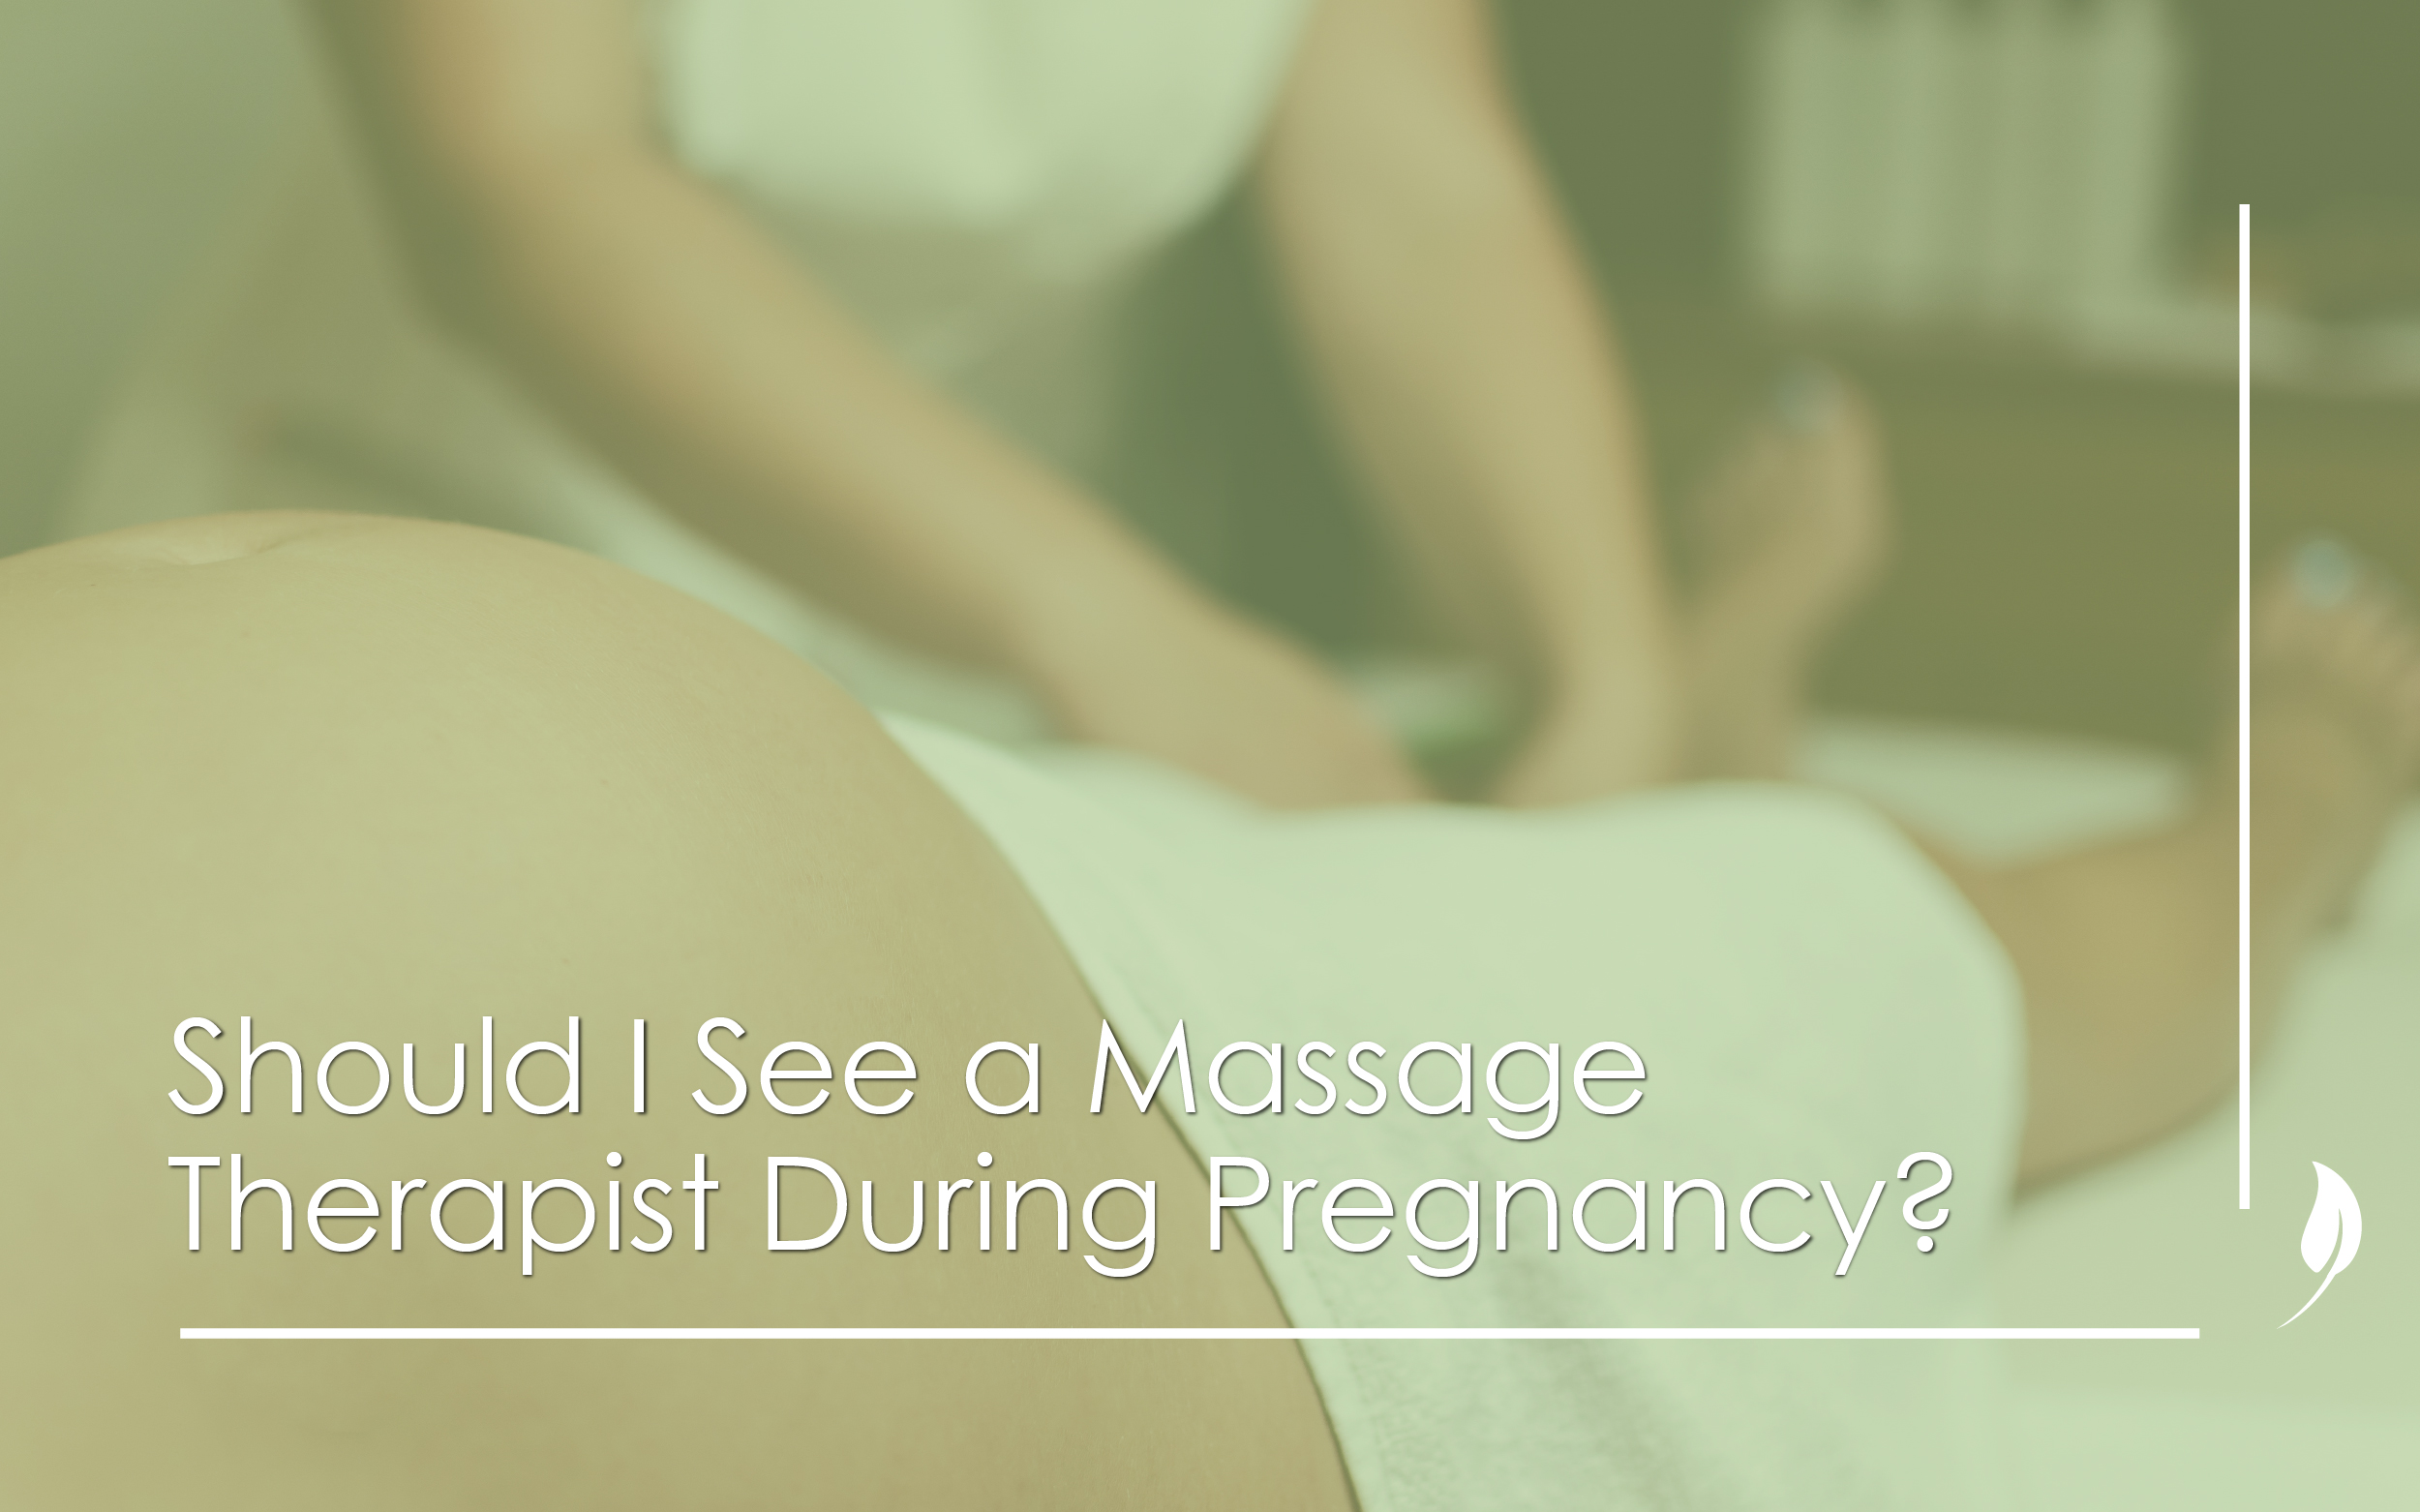 Should I See a Massage Therapist During Pregnancy?